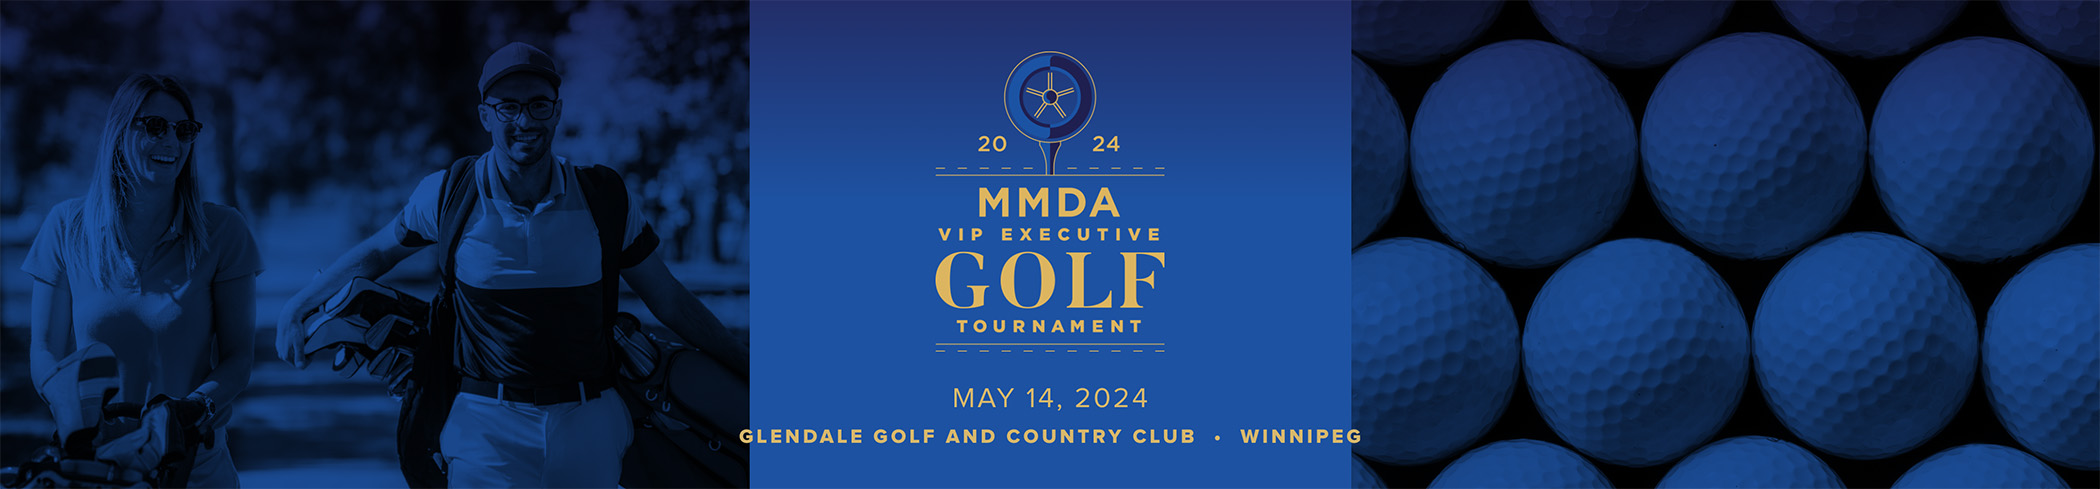 2024 MMDA VIP Executive Golf Tournament May 14, 2024, Glendale Golf and Country Club